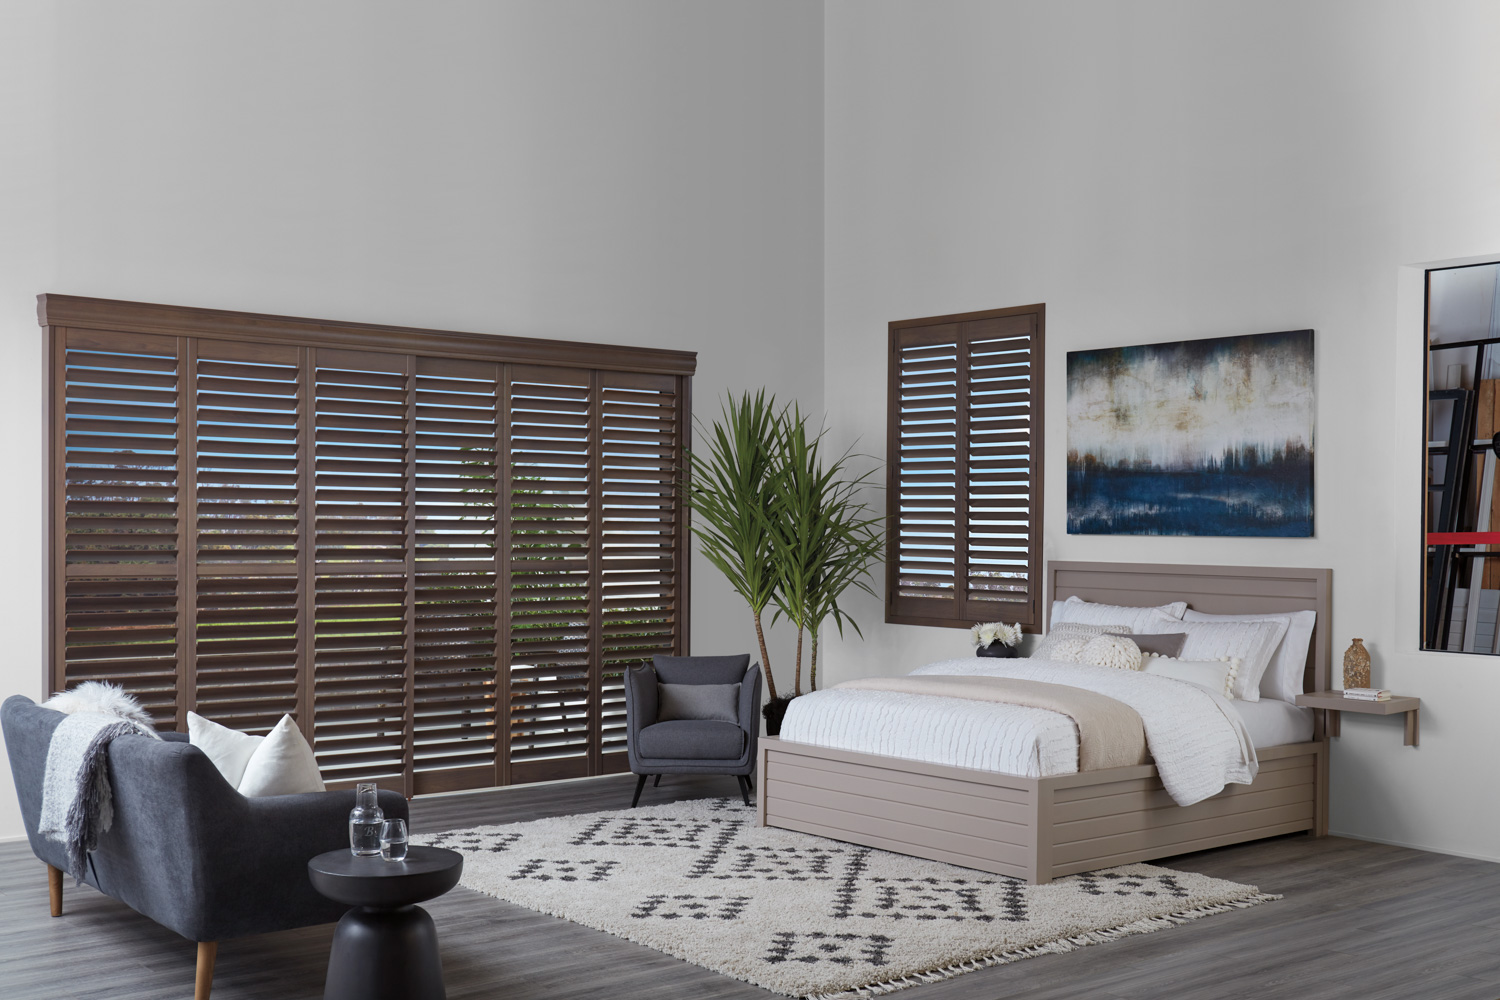 The bedroom is furnished with a bed, chair, and a painting, all of which showcase Composite Shutters.